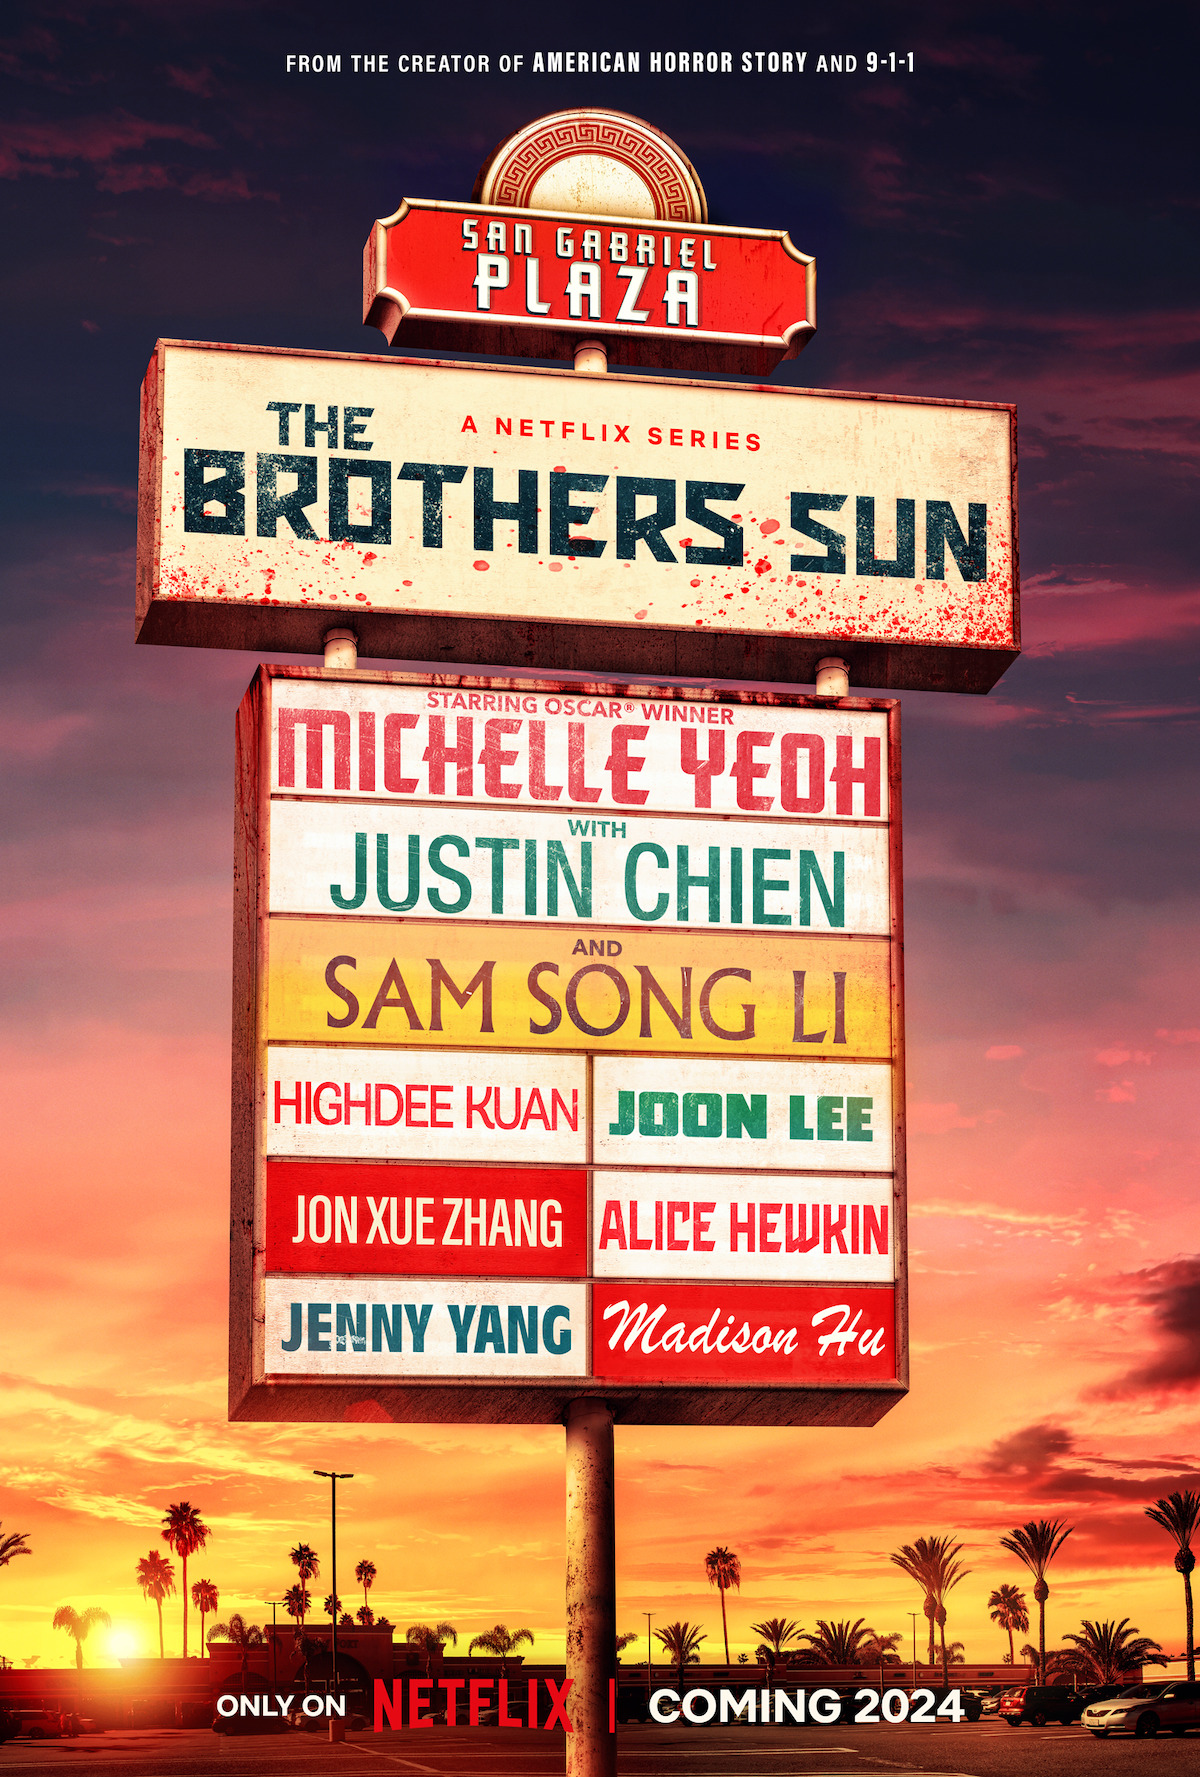 Meet the All-Asian Cast of 'The Brothers Sun